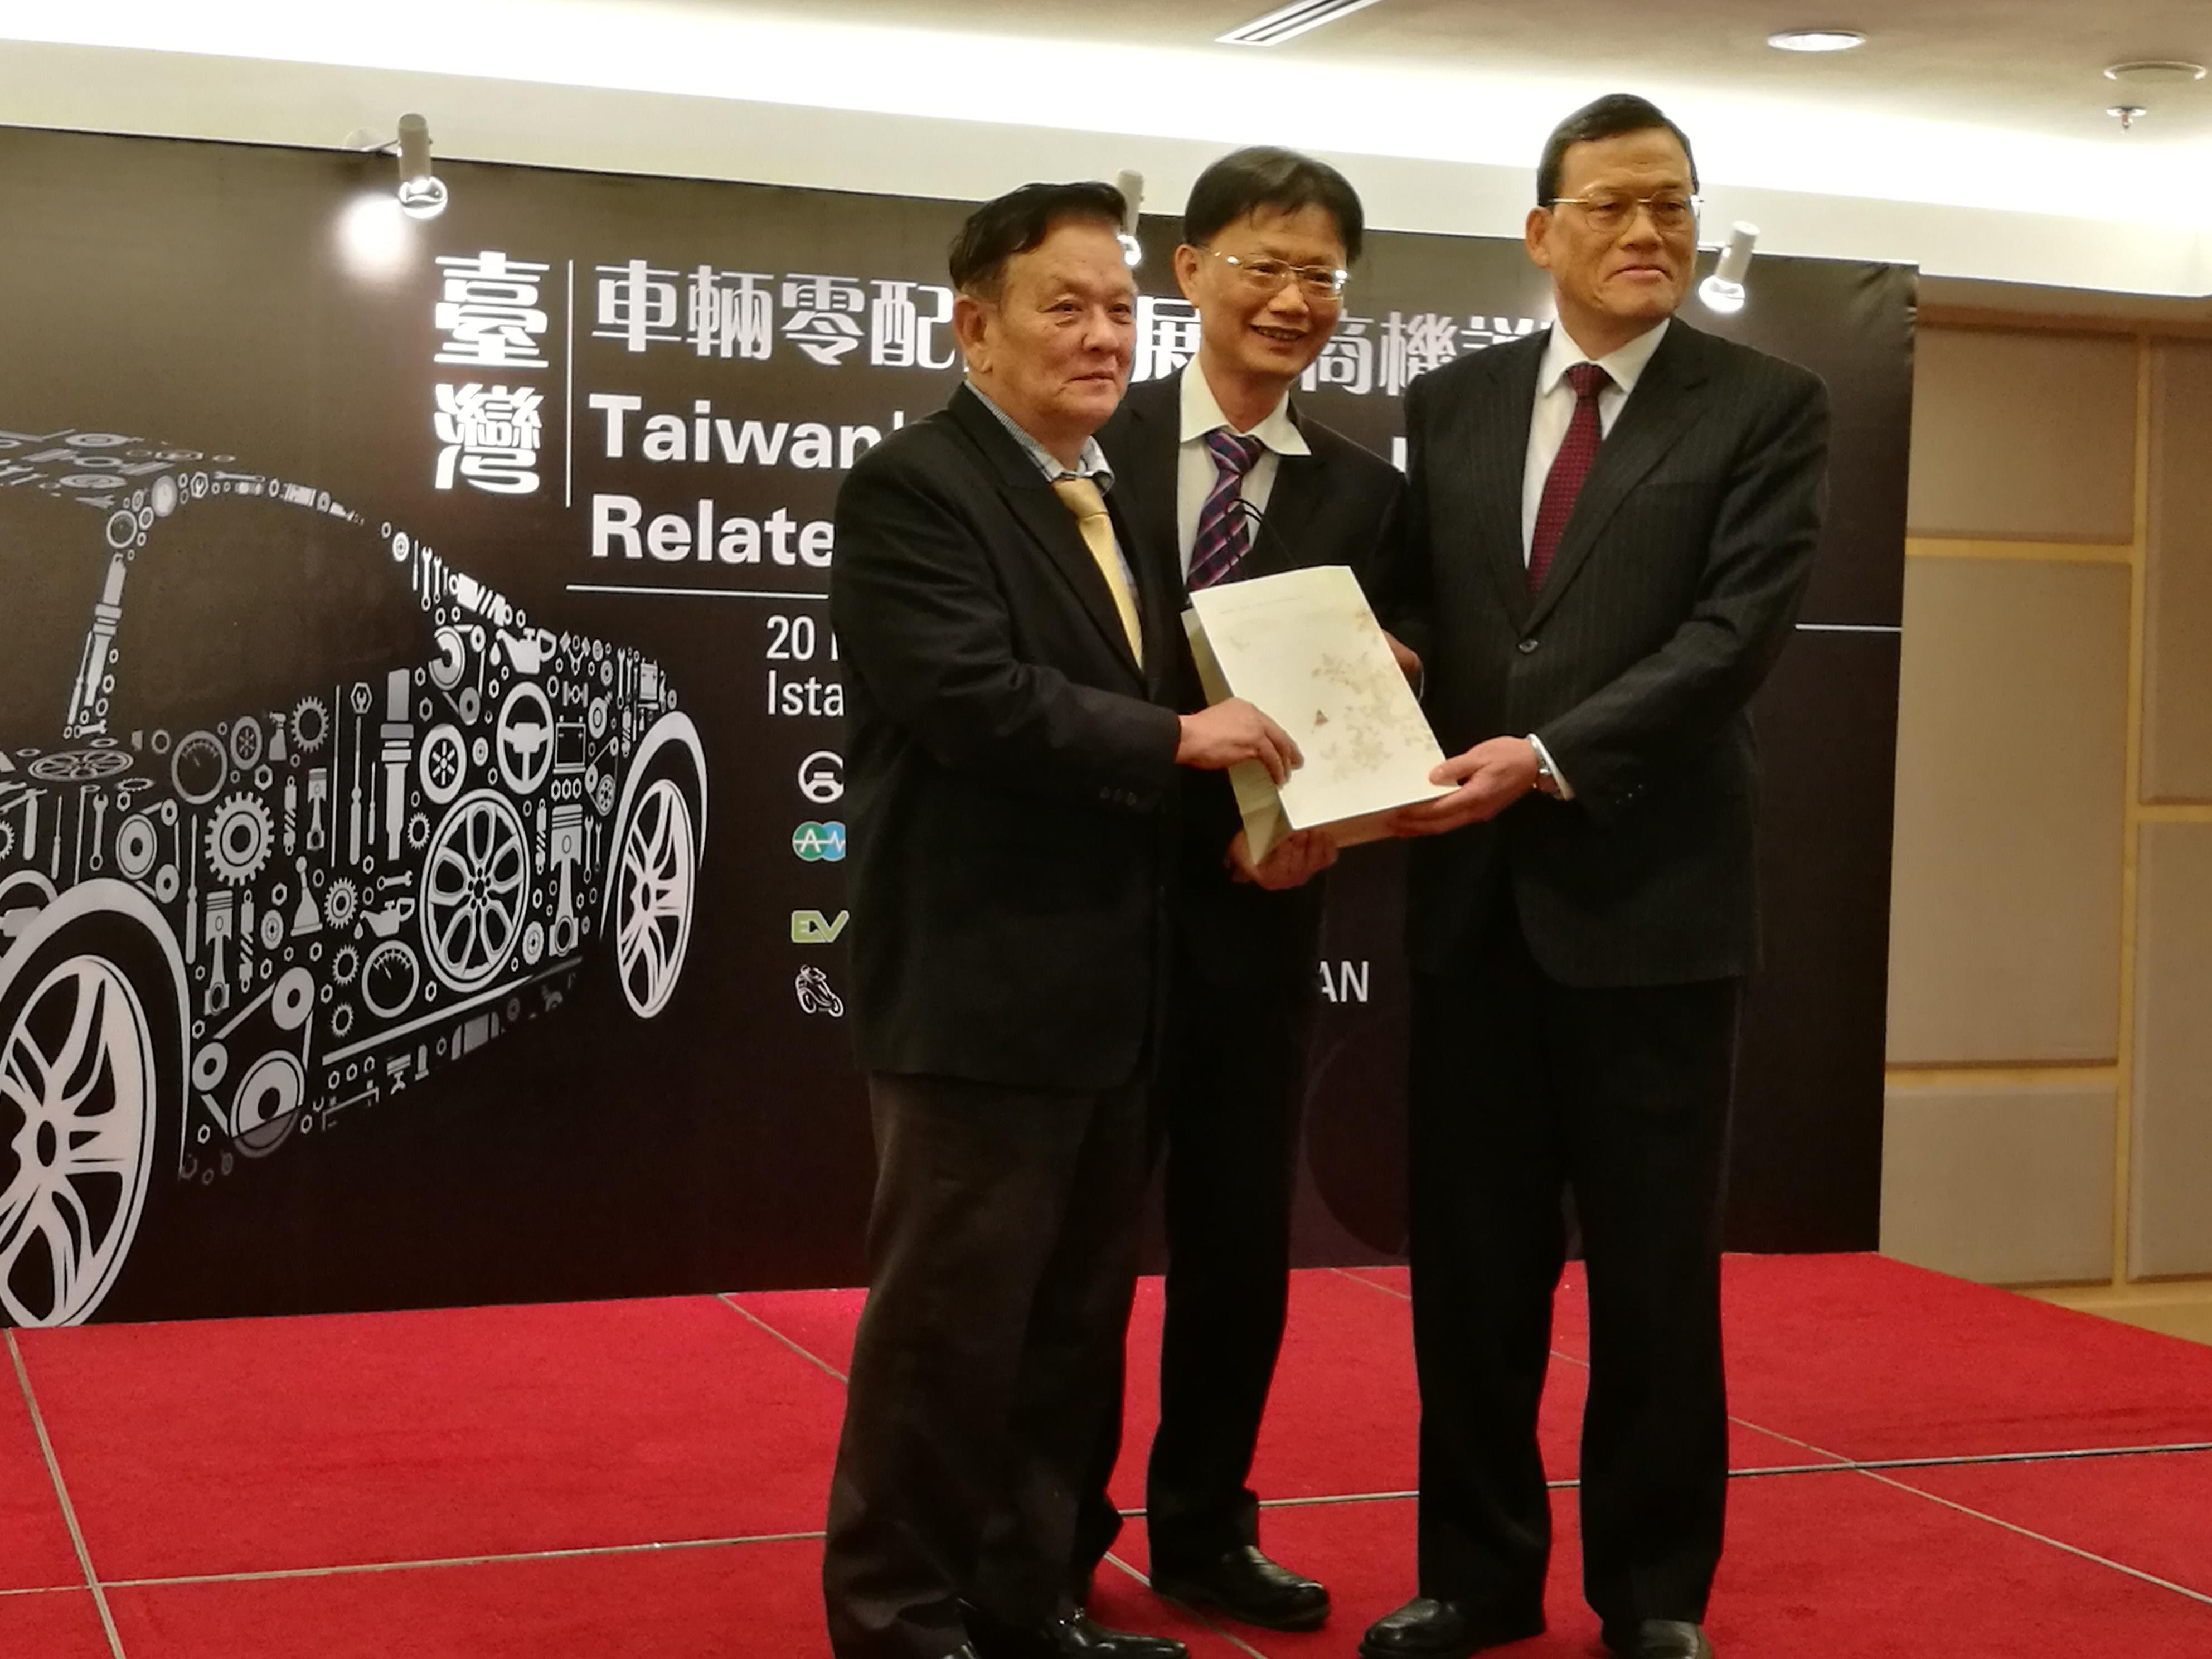 Representative Chang, James Chi-ping (right) attends the 2017 Taiwan Automobiles &amp; Motorcycle Parts Industry Exhibition Seminar at Hotel Istana Kuala Lumpur on February 20, 2017